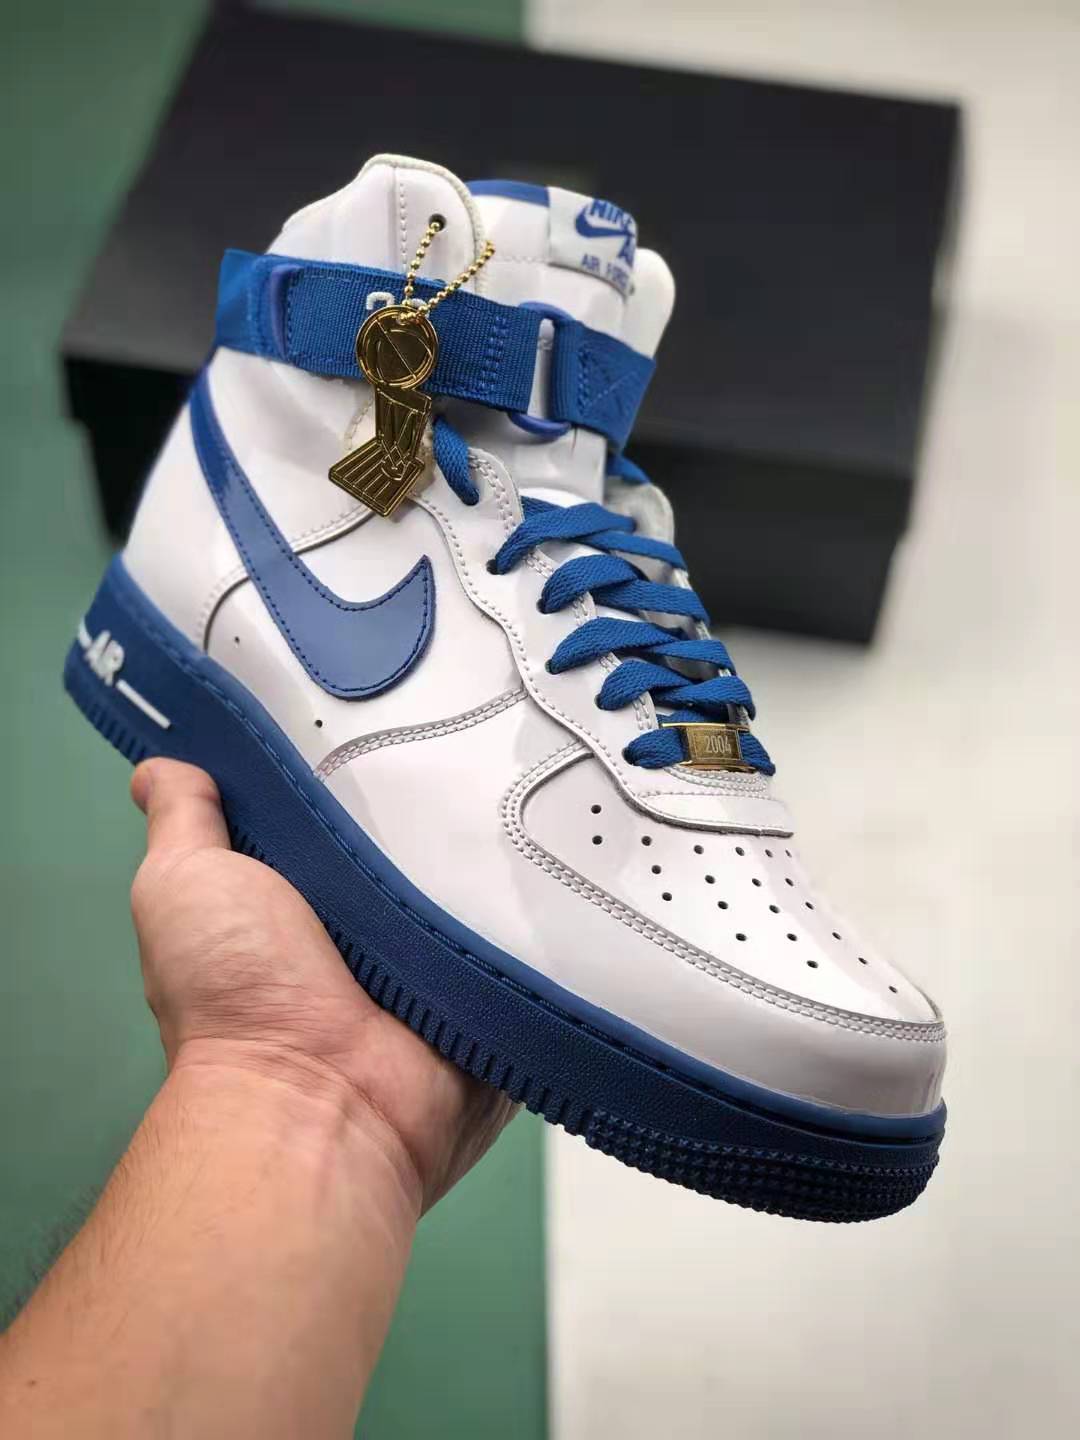 Nike Air Force 1 High Sheed Think 16 Rude Awakening White Blue AQ4229-100 - Limited Edition Sneakers